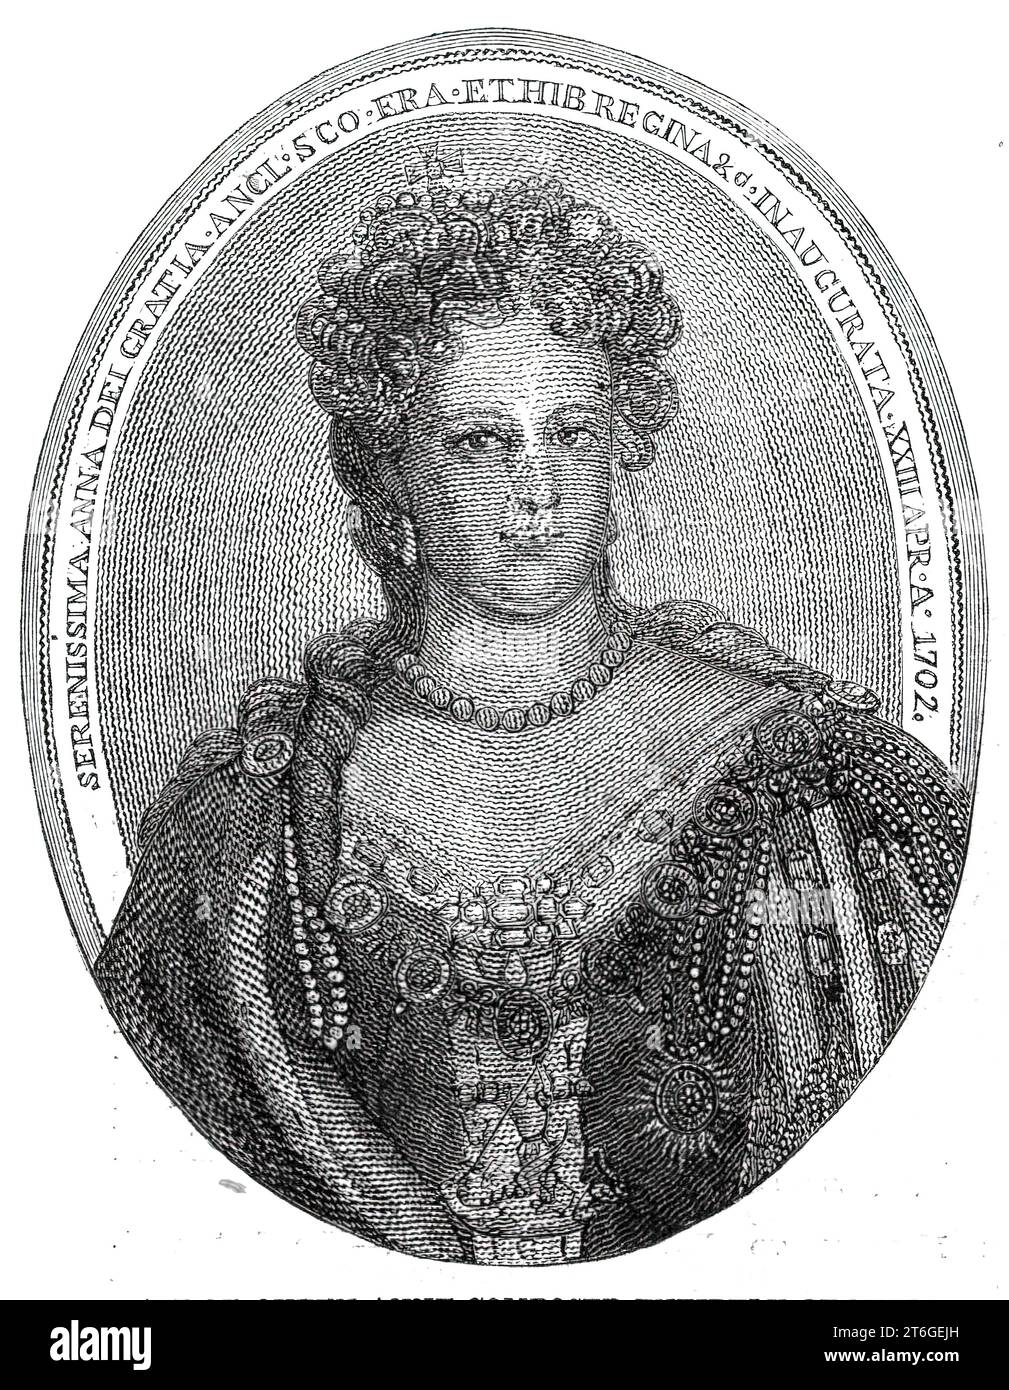 Portrait of Queen Anne composed entirely of minute writing, 1860. '...one day, during the examination of a slim folio volume (Add. MSS. 4027), Sir Frederic Madden discovered the curious and interesting fact that...[the portrait was not the work] of the graver at all, but [was] composed entirely of writing executed with a pen - containing words enough to make a moderately-sized book! The volume in question... is entitled &quot;An Account of the Several Matters and Transactions of State contained in her Royal Majesty Queen Anne's Picture since her happy Accession to the Throne of her Ancestors. Stock Photo